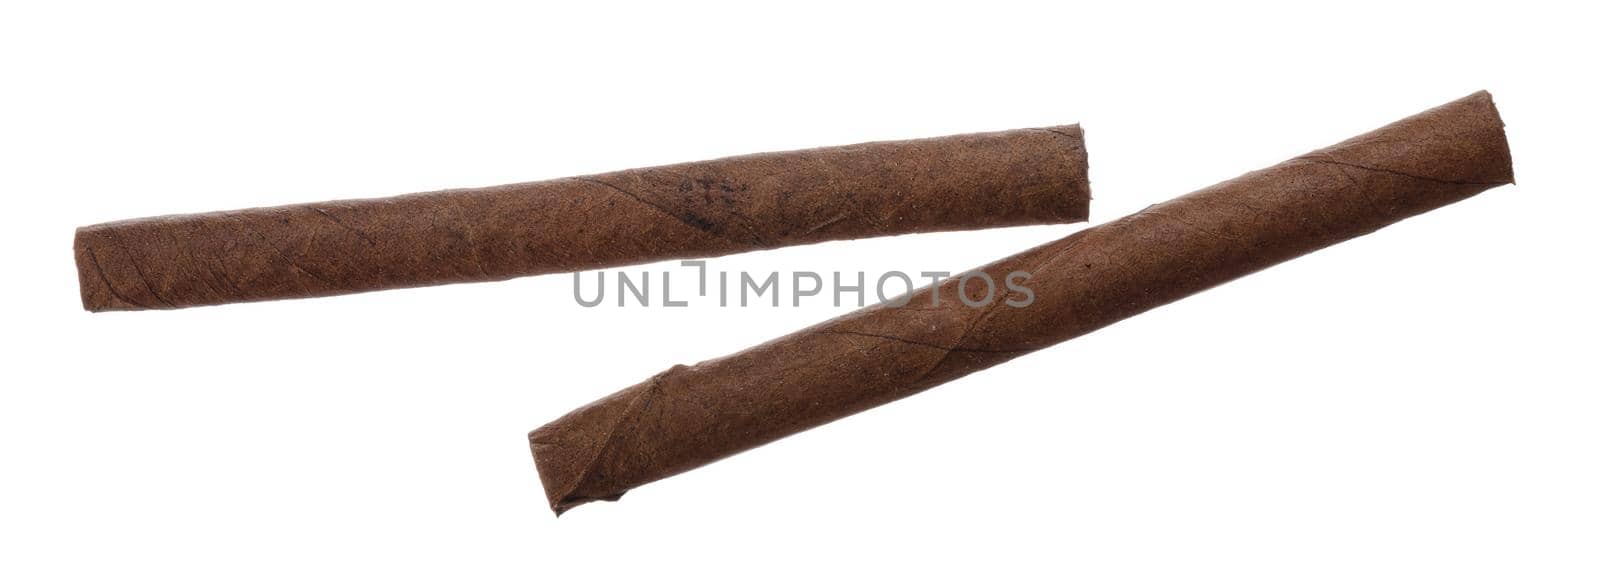 Hand rolled cigars isolated on white background top view